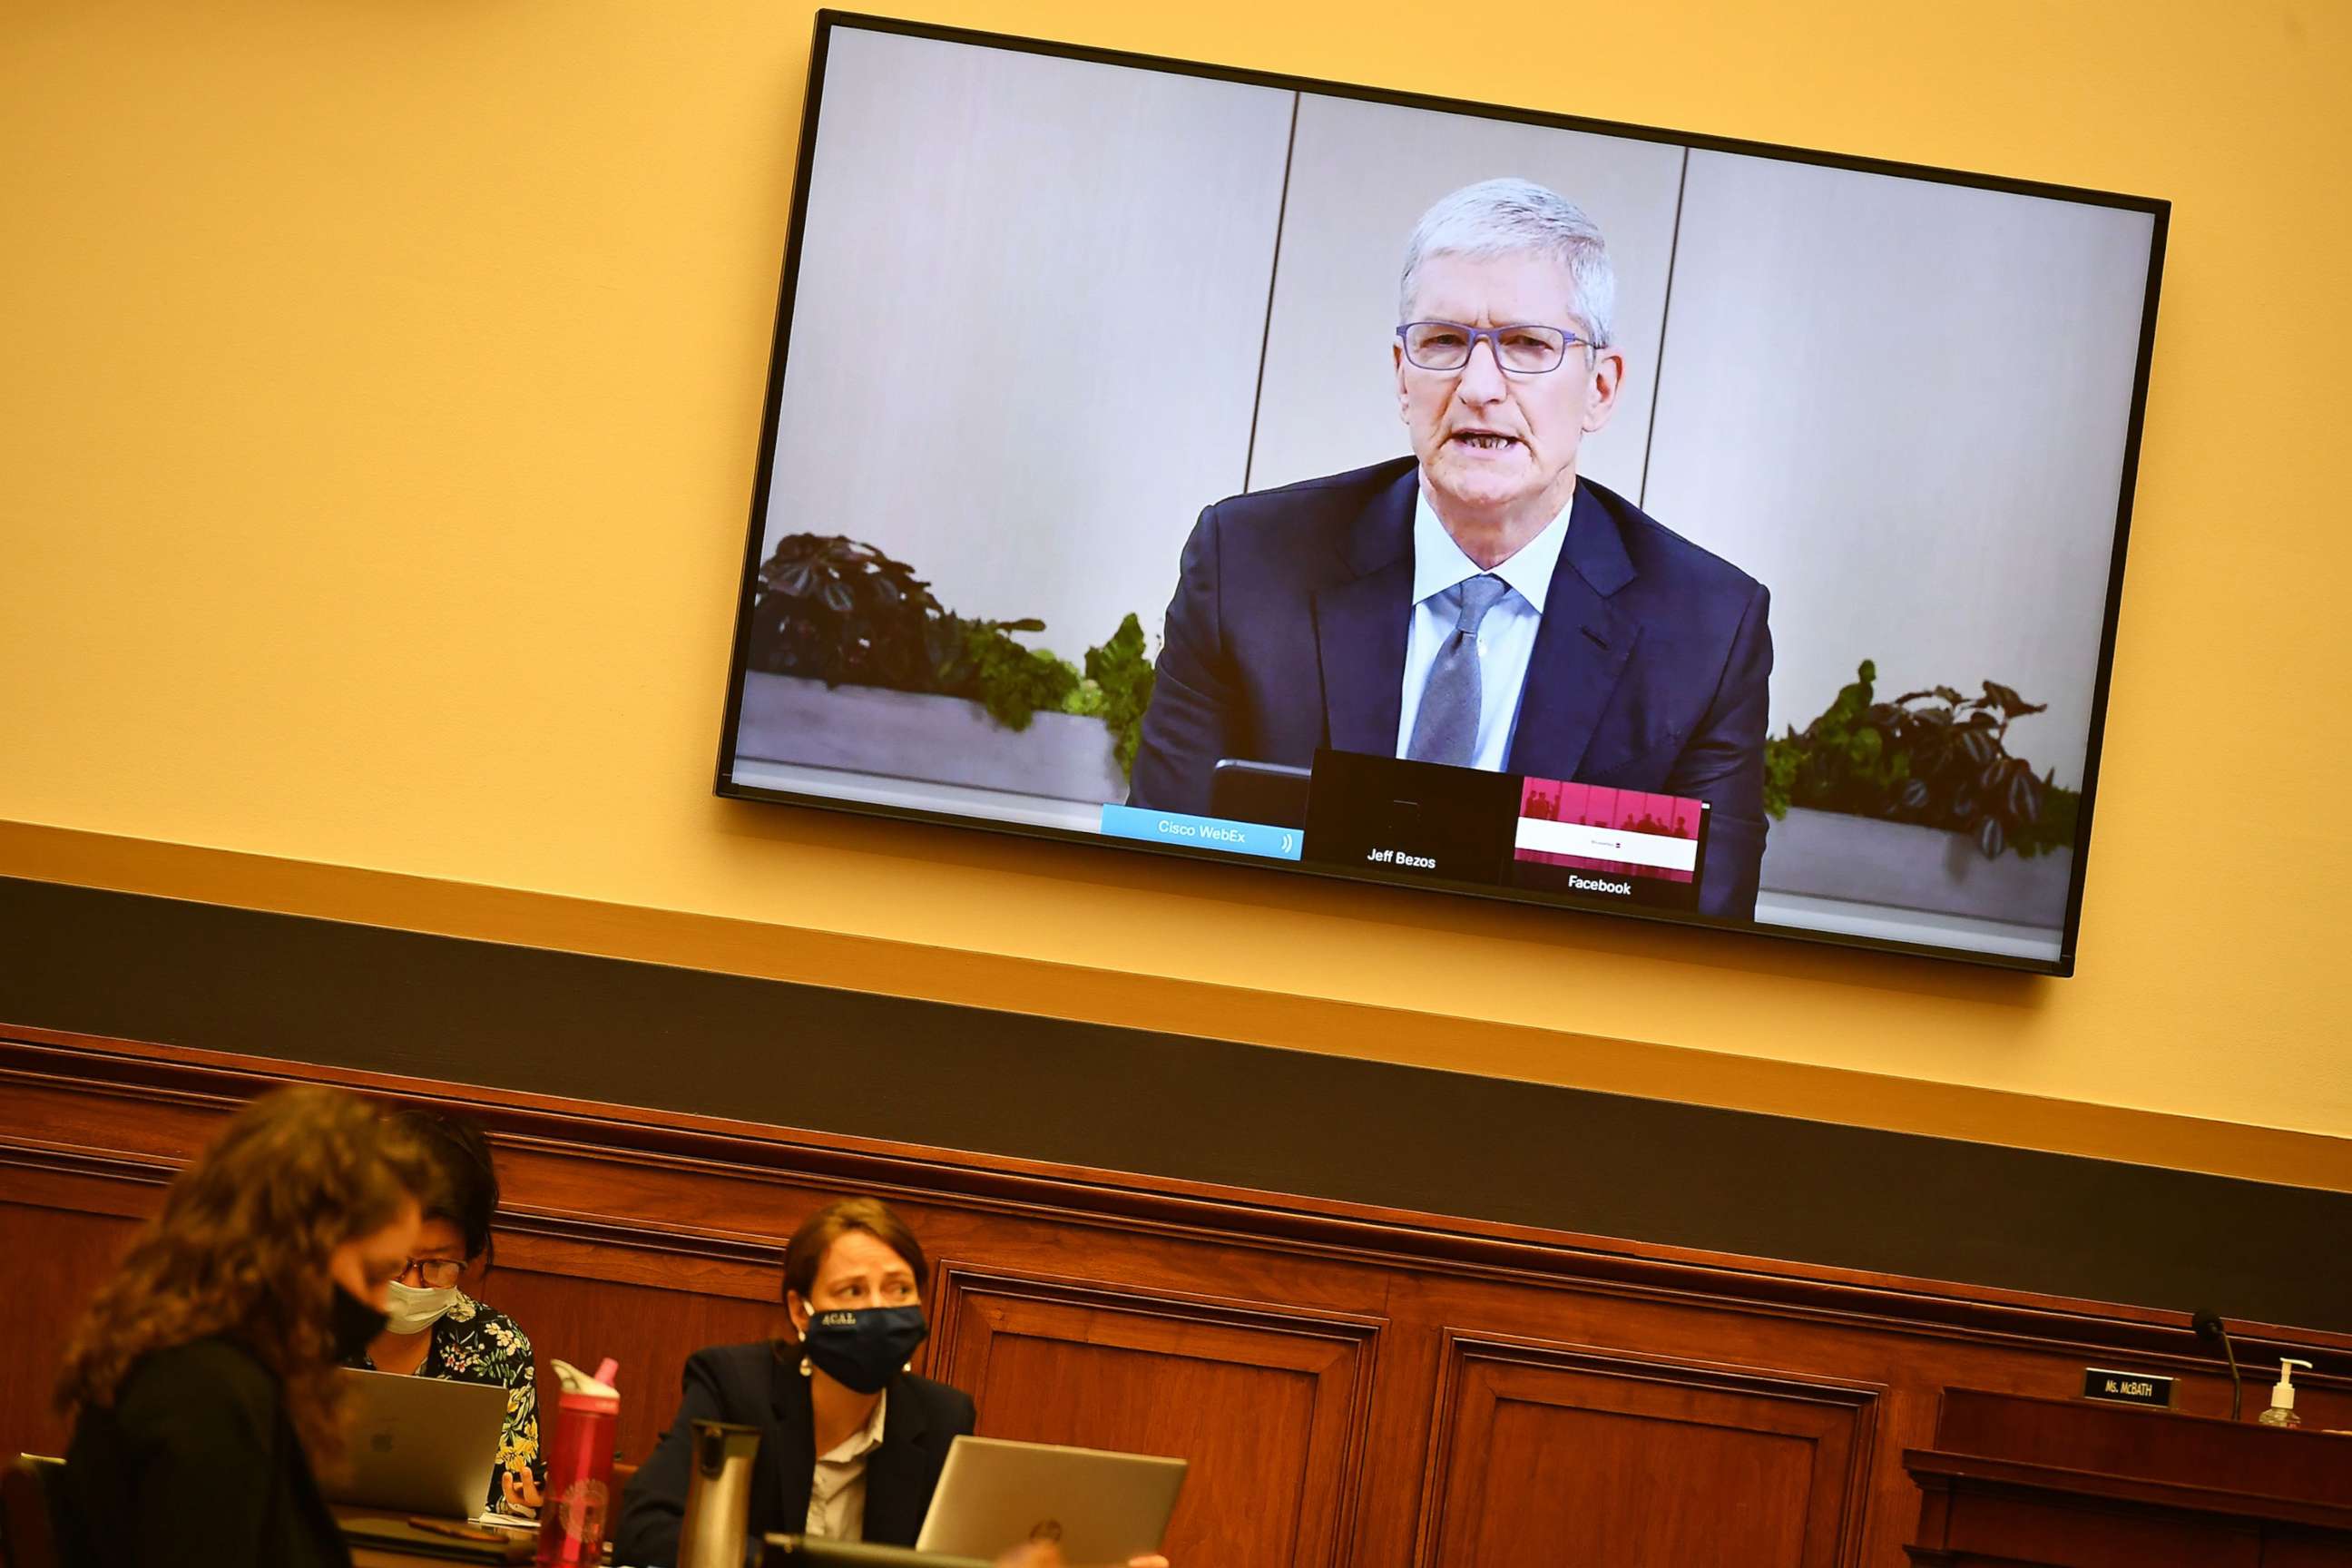 PHOTO: Apple CEO Tim Cook testifies before the House Judiciary Subcommittee on Antitrust, Commercial and Administrative Law on "Online Platforms and Market Power" in the Rayburn House office Building on Capitol Hill in Washington, DC on July 29, 2020.